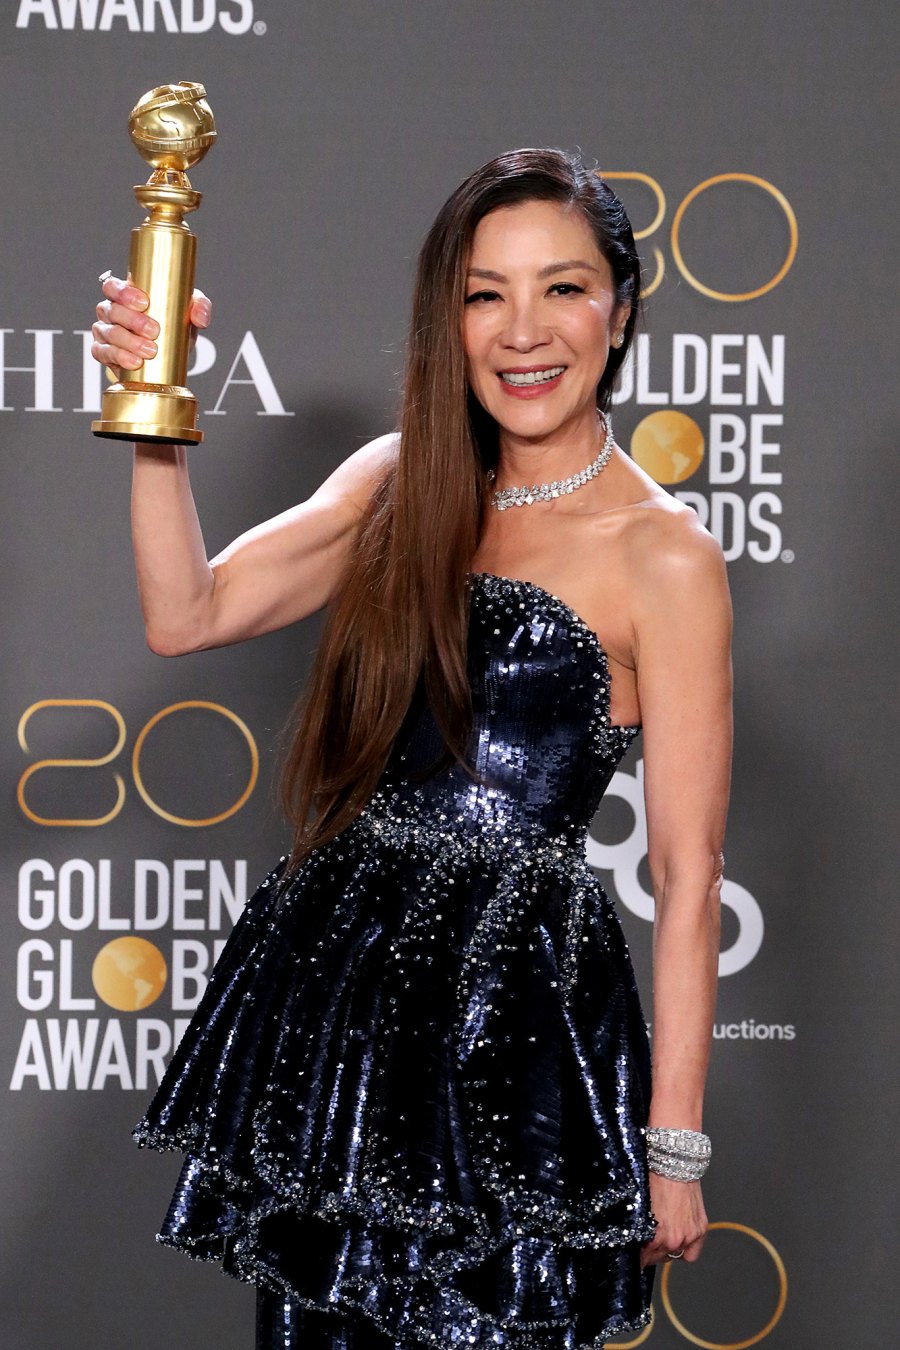 Golden Globes 2023 - Winners - 980 80th Annual Golden Globe Awards, Press Room, Beverly Hilton, Los Angeles, USA - 10 Jan 2023 Michelle Yeoh